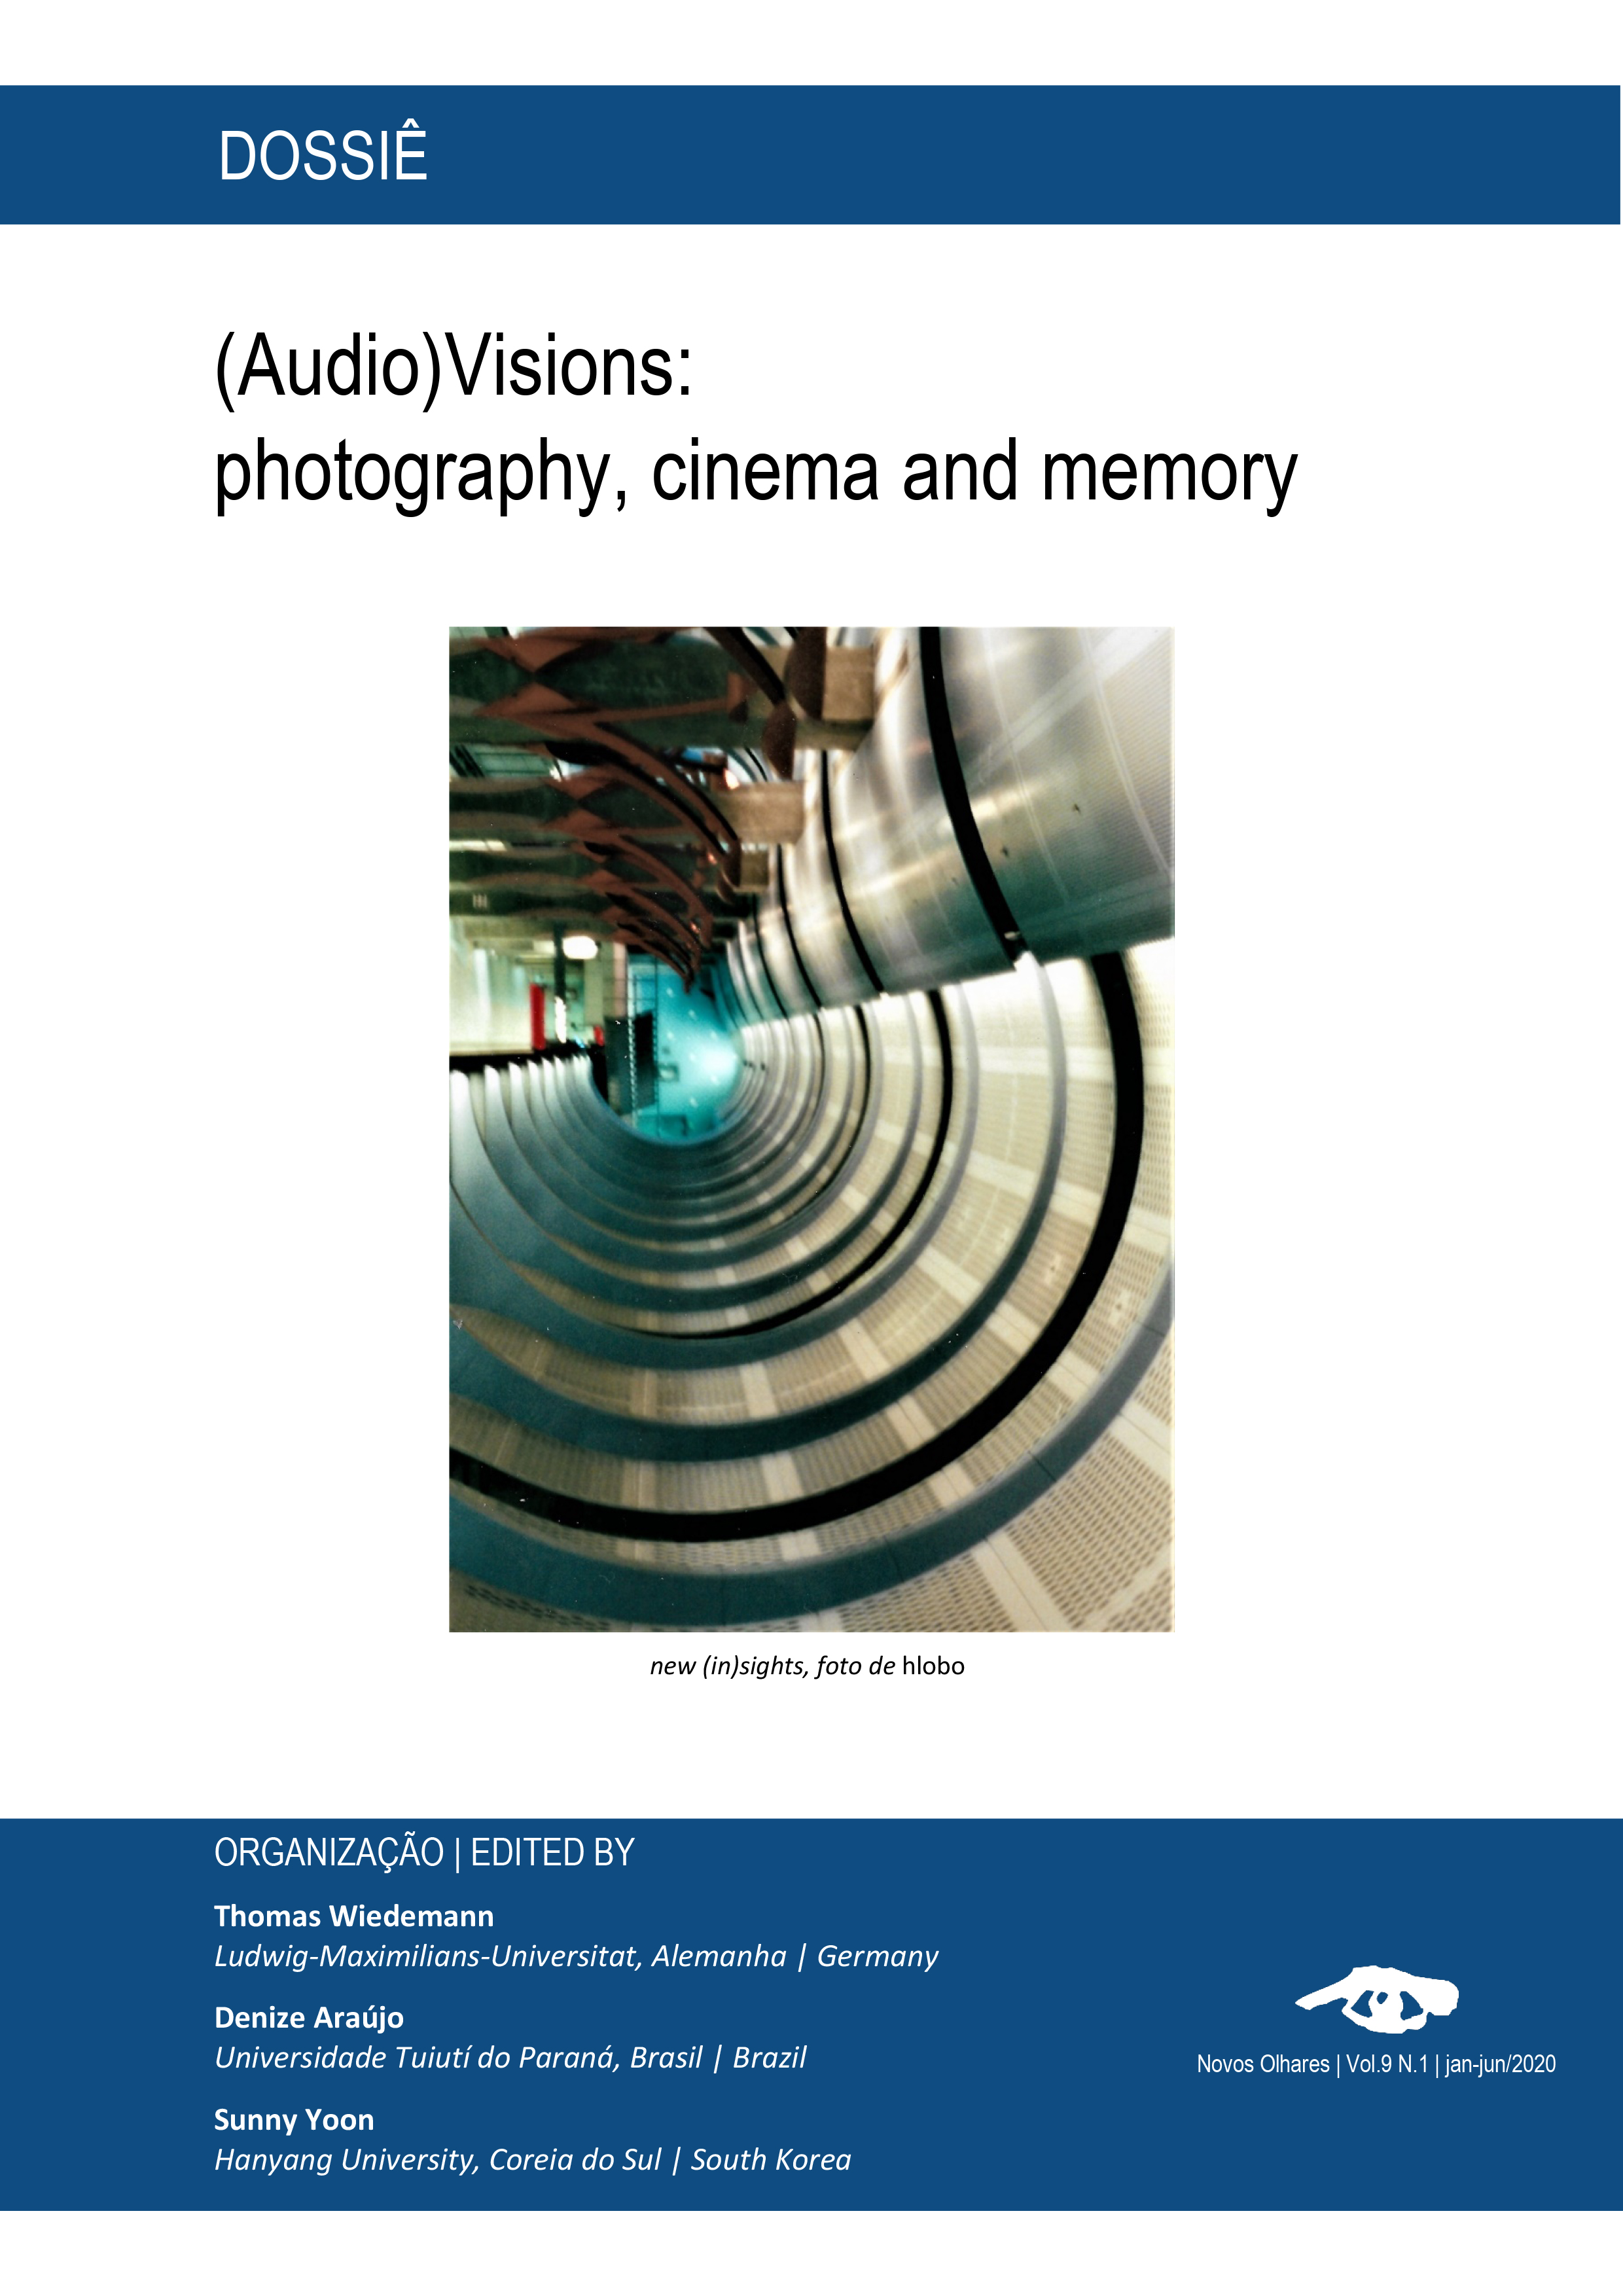 Dossiê: (Audio)Visions: photography, cinema and memory